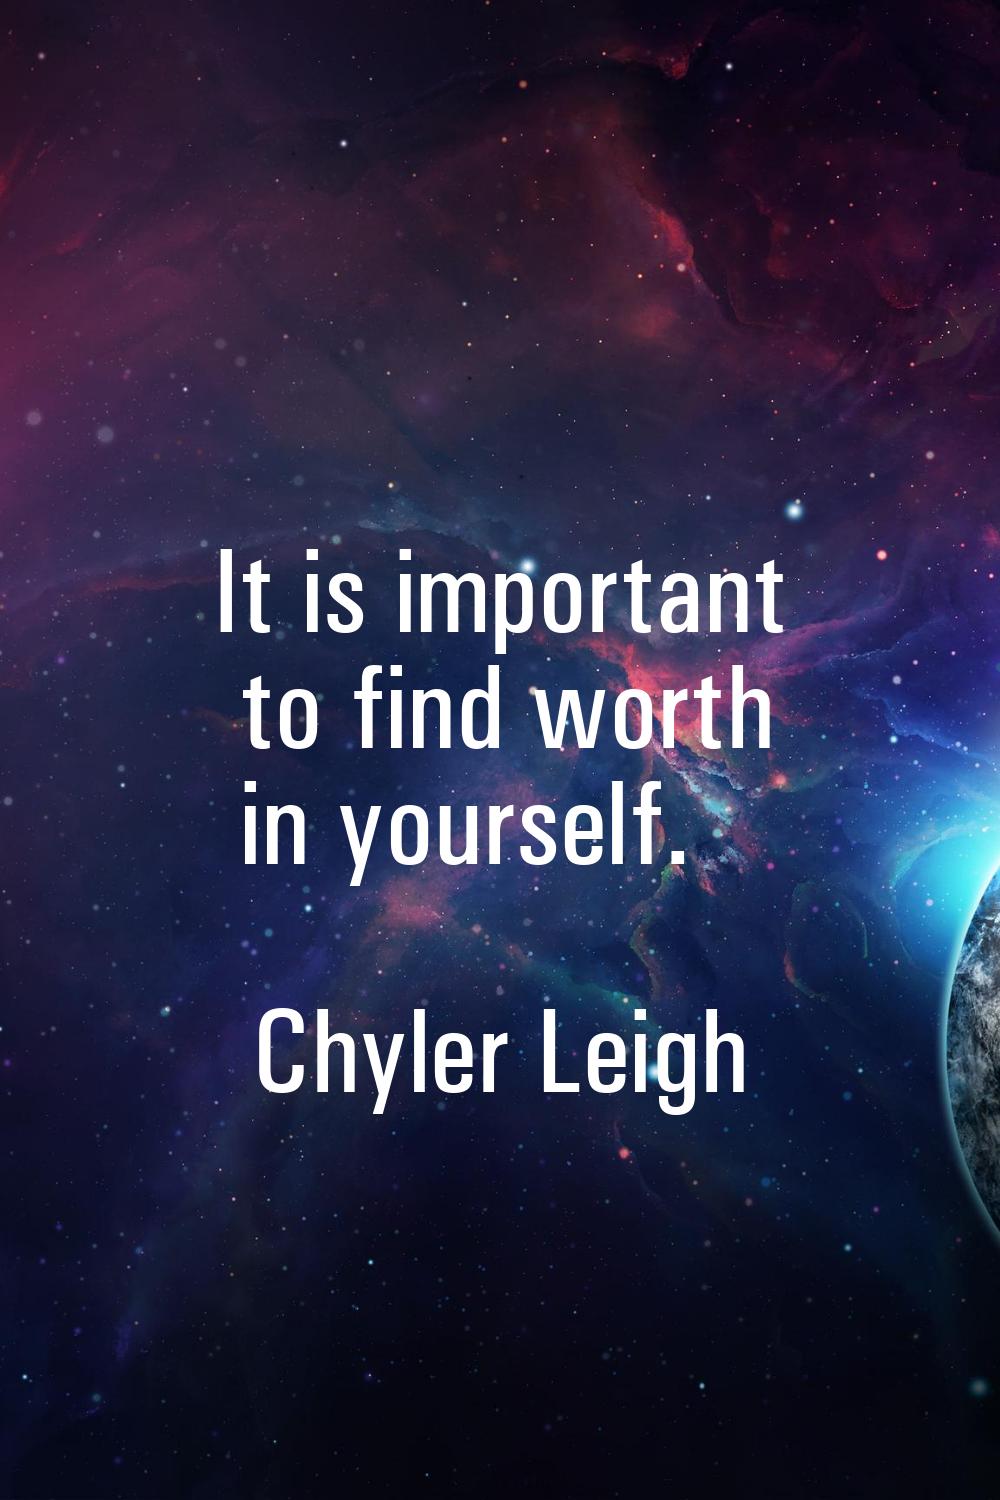 It is important to find worth in yourself.